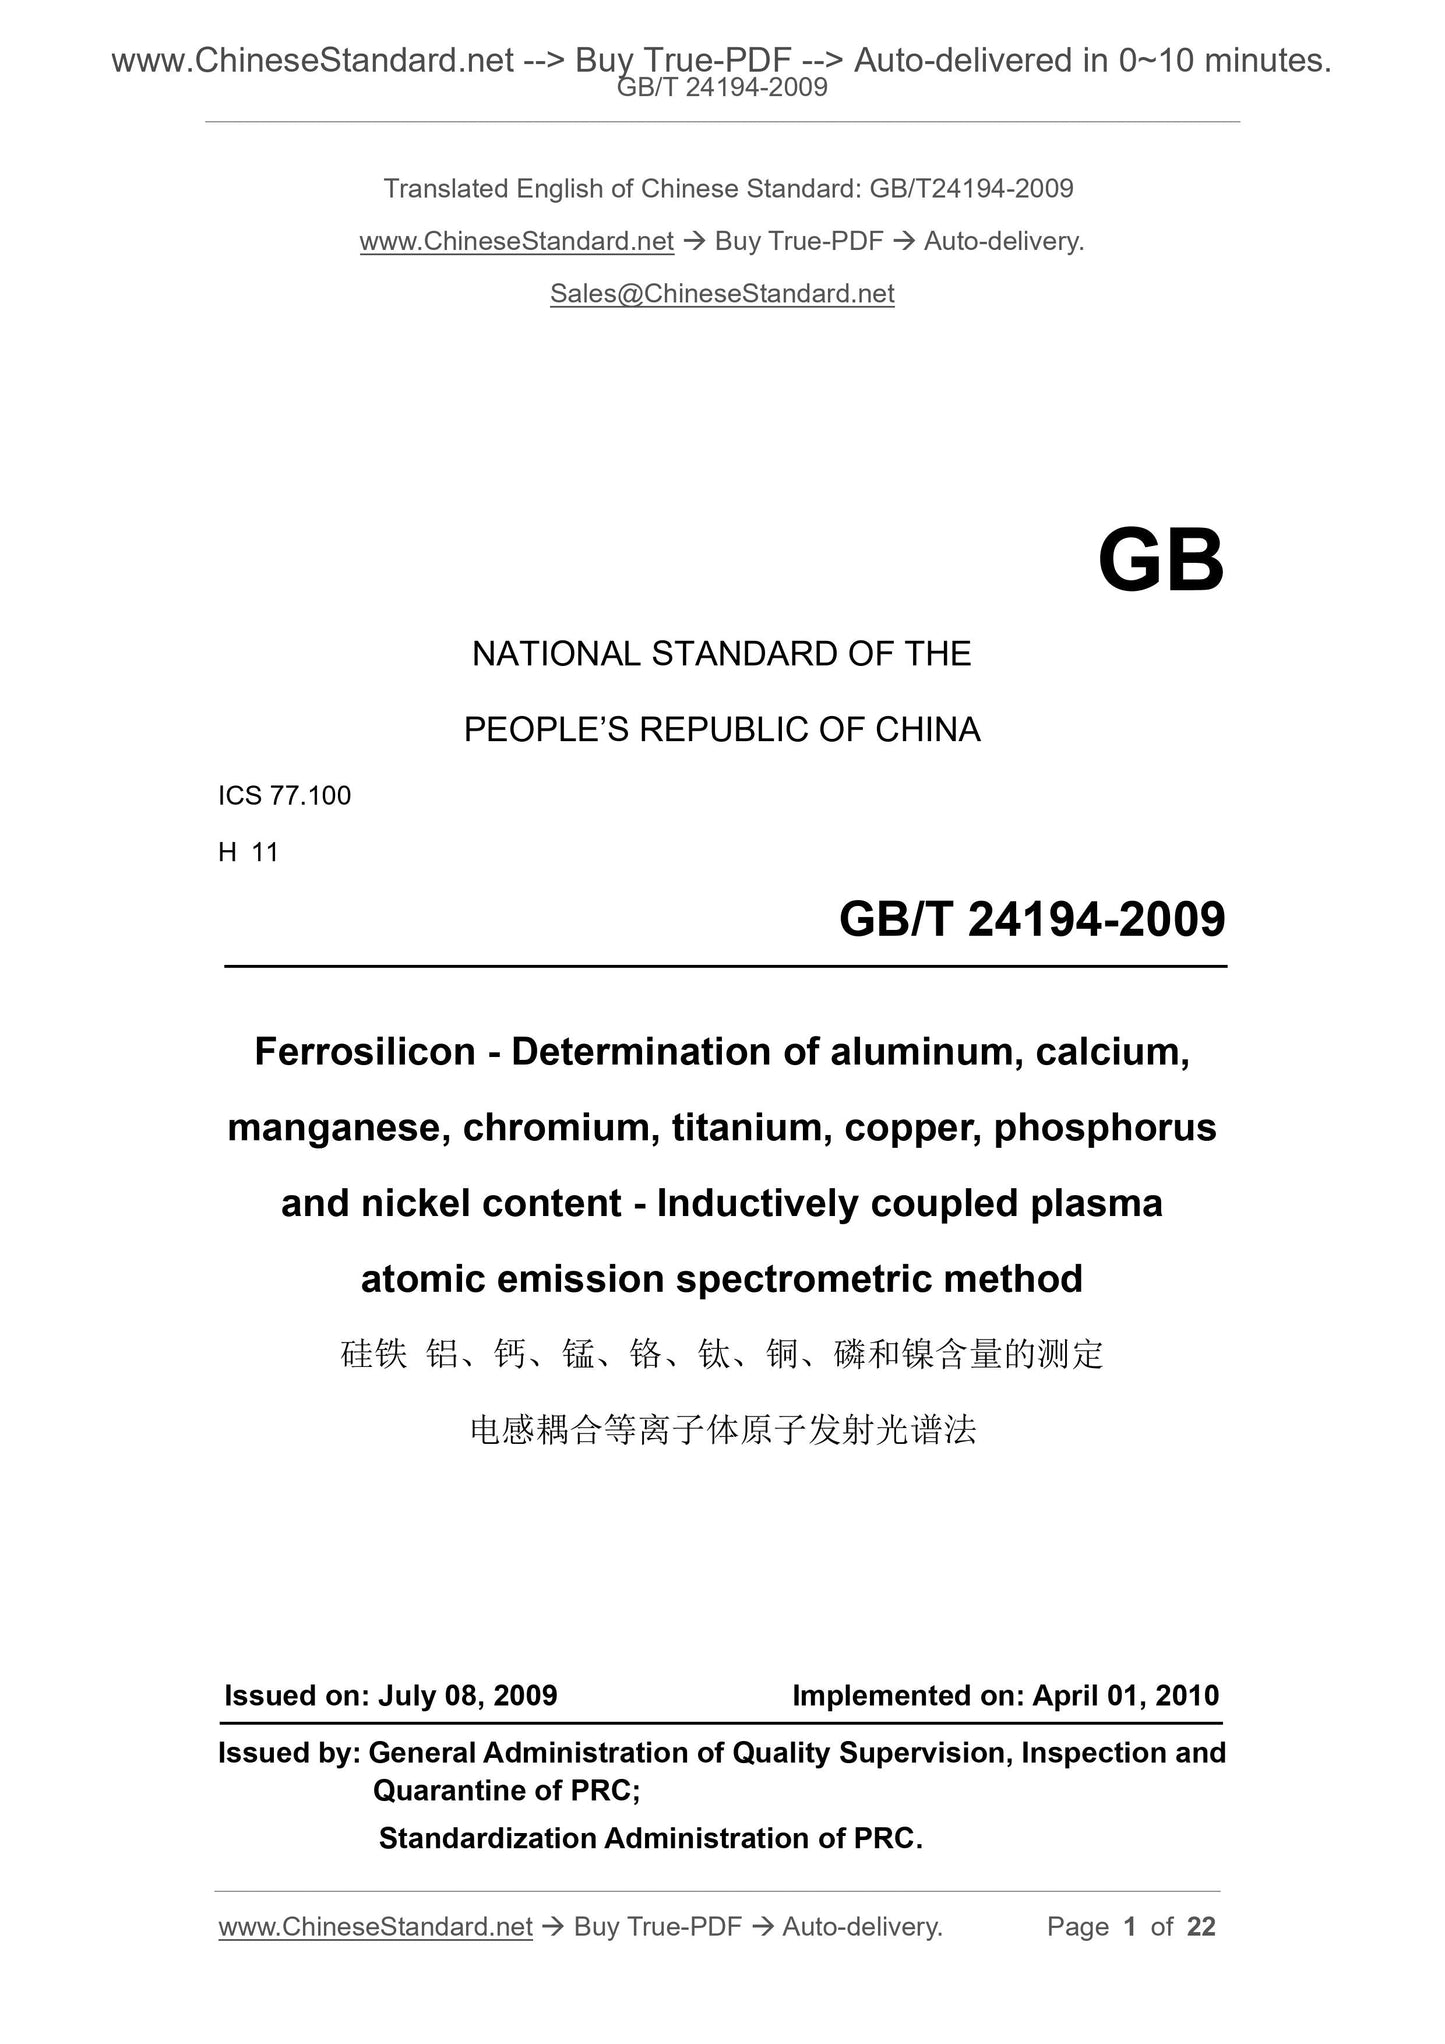 GB/T 24194-2009 Page 1